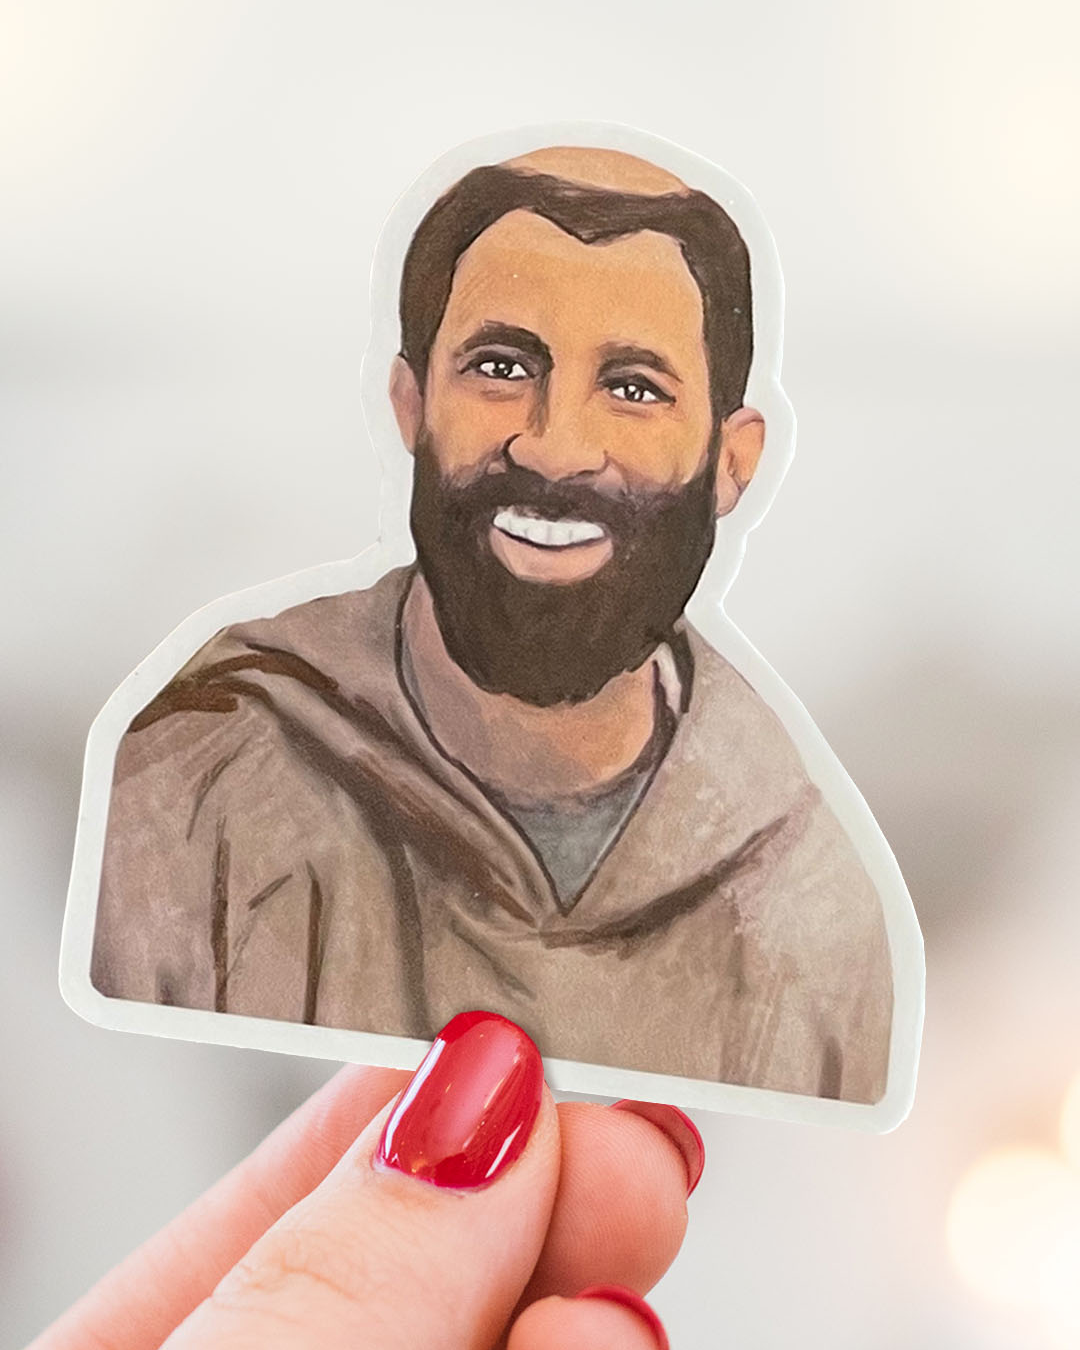 Saint Francis Stickers 3 Pack